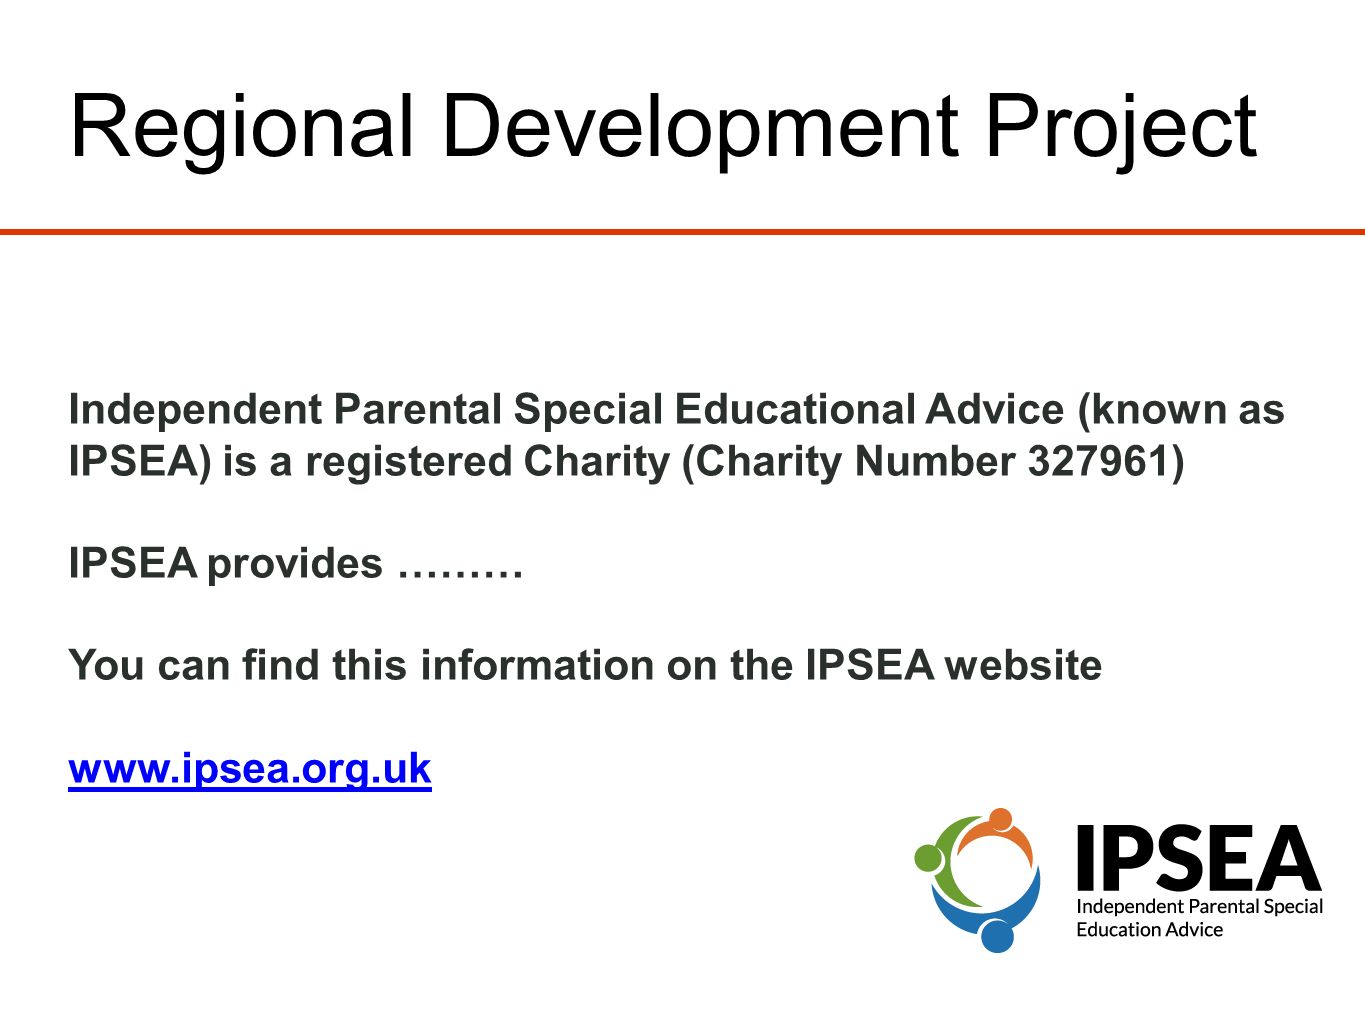 Regional Development Project Independent Parental Special Educational Advice (known as IPSEA) is a registered Charity (Charity Number ) IPSEA provides ……… You can find this information on the IPSEA website